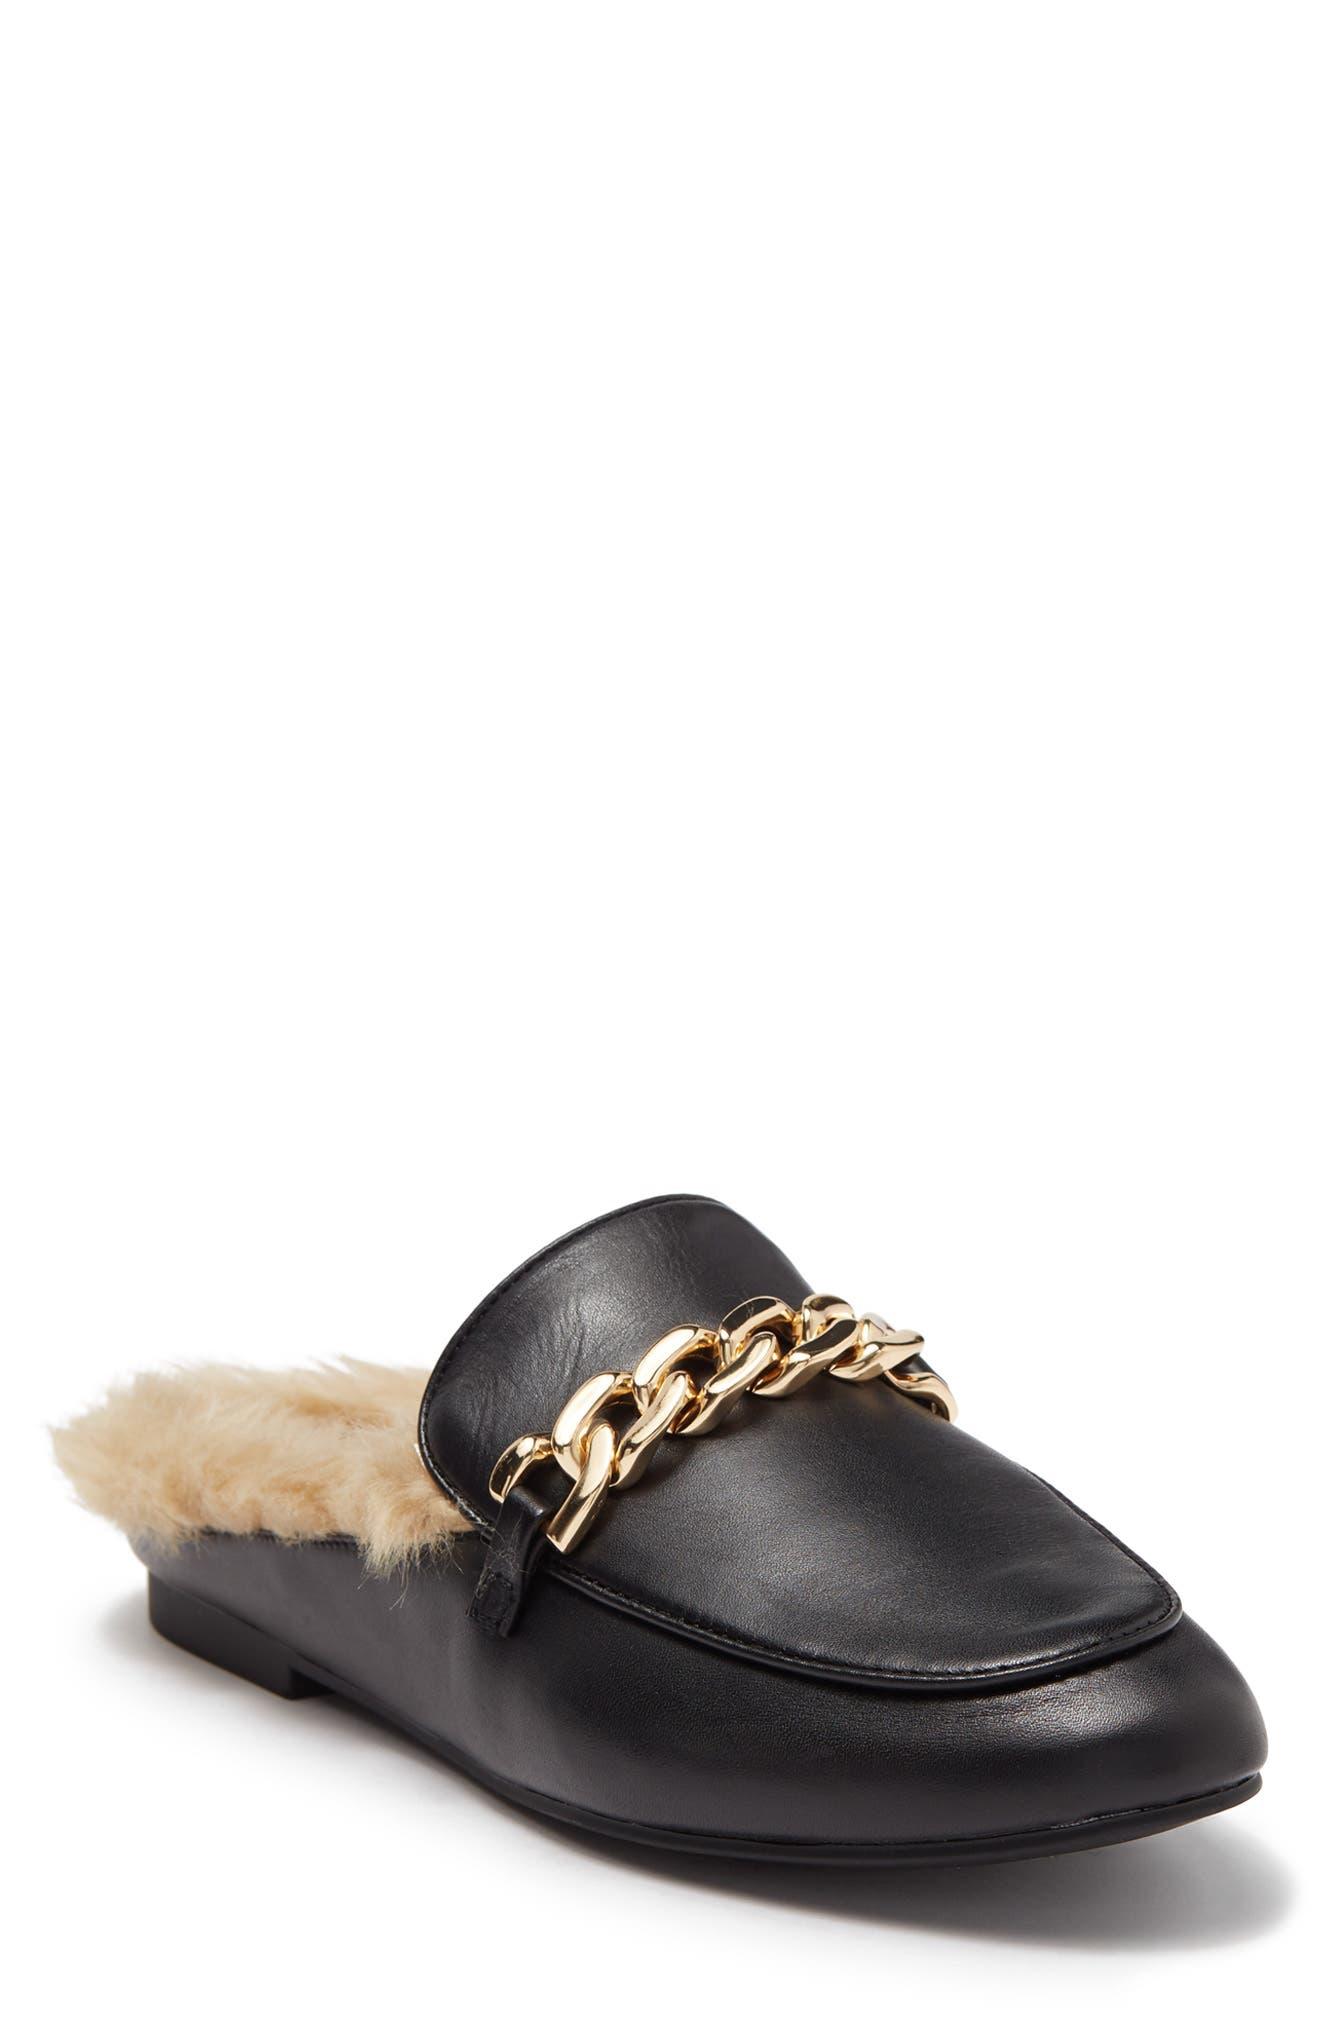 Steve Madden Feleti Faux Fur Lined Leather Loafer Mule In Black Leather At  Nordstrom Rack | Lyst